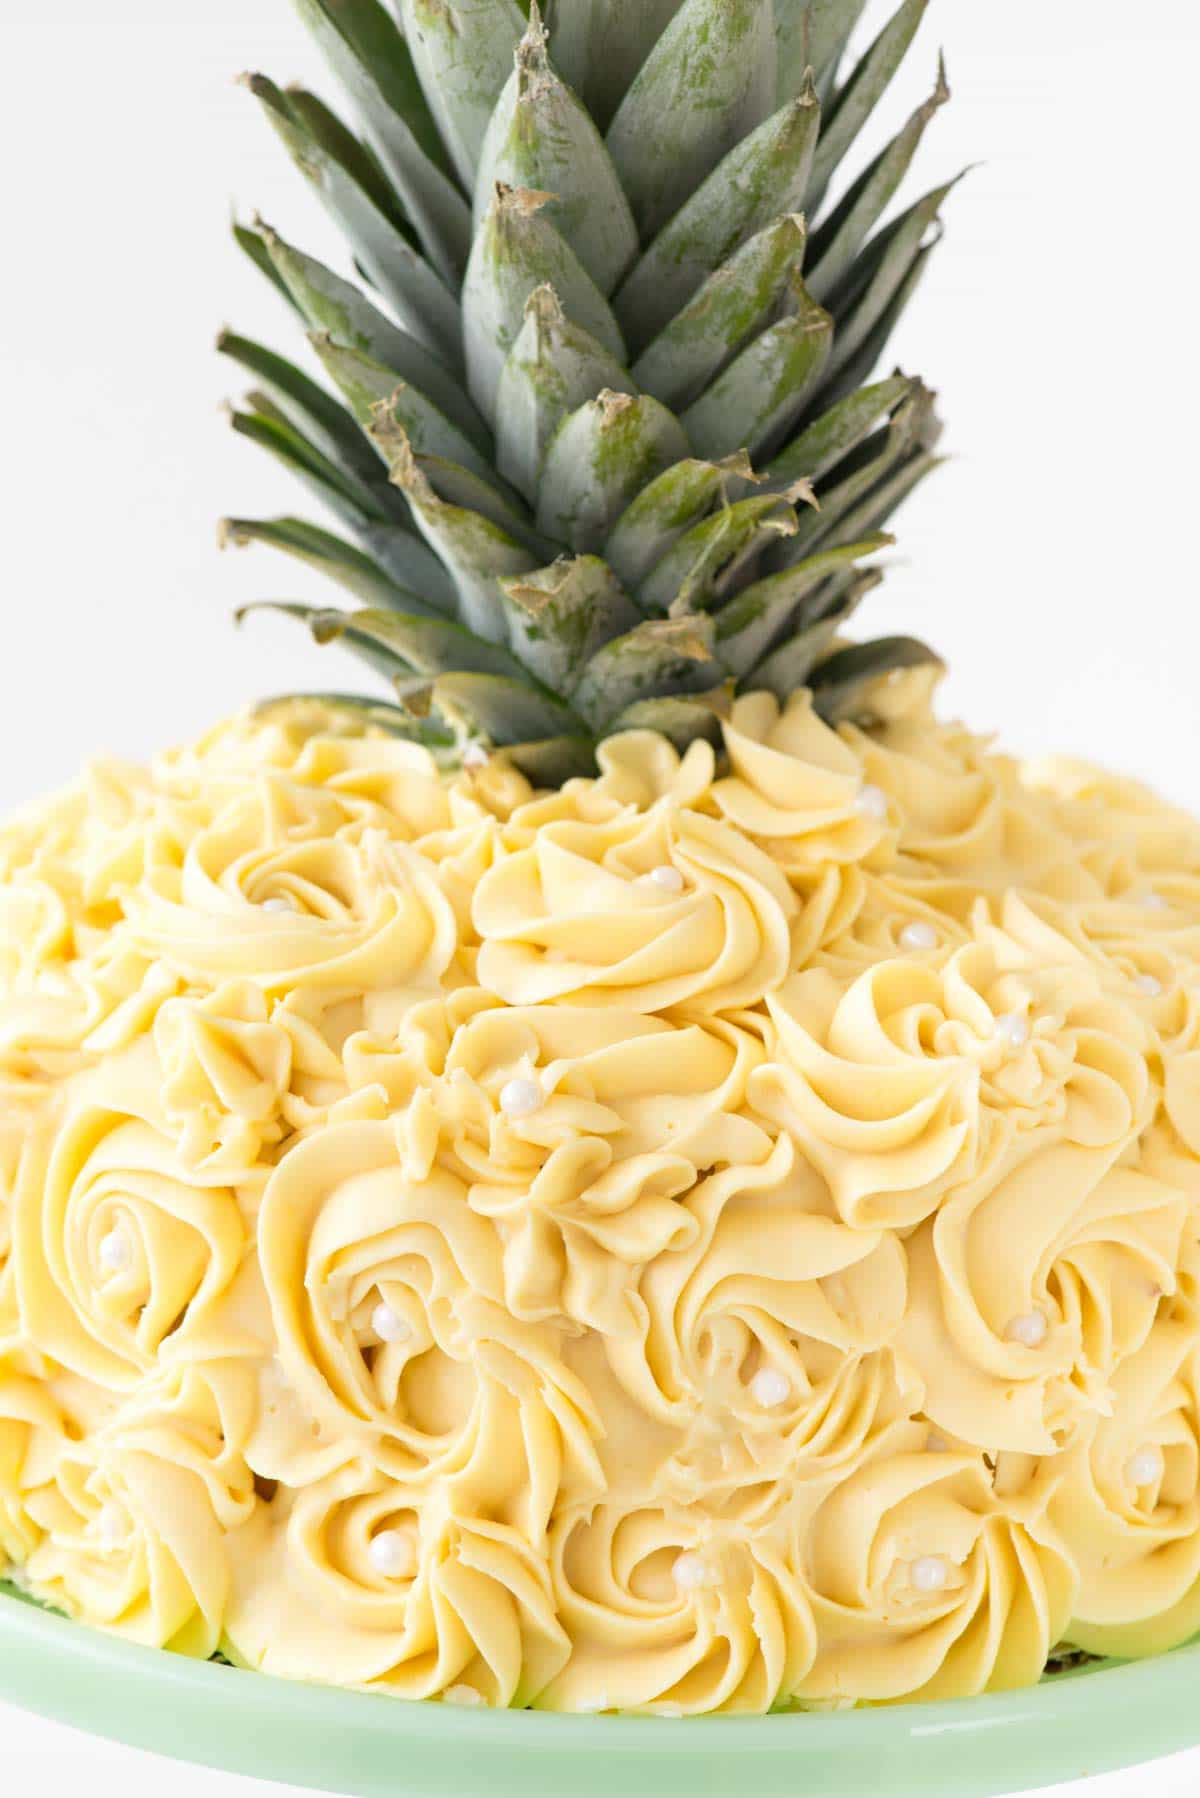 Pineapple Cake - this is the EASY way to make a pineapple cake for a pineapple party! Simply frost a 2-layer cake with yellow rosette swirls and you have a pineapple cake EASILY!